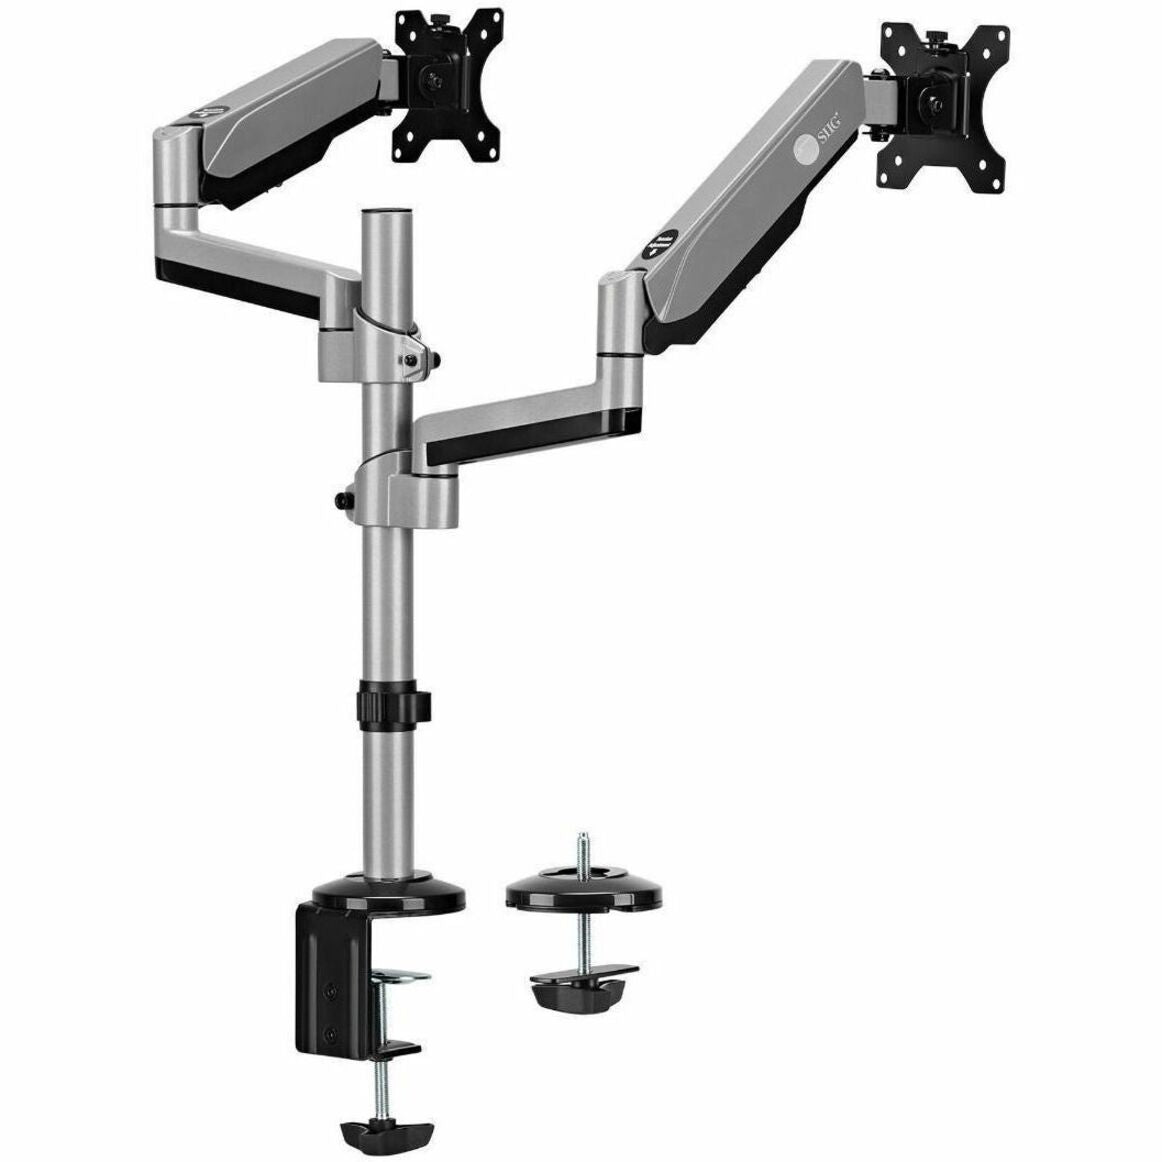 SIIG AC CE-MT3R11-S1 Dual Stacked Monitor Arm Desk Mount 17-32 Brown Box